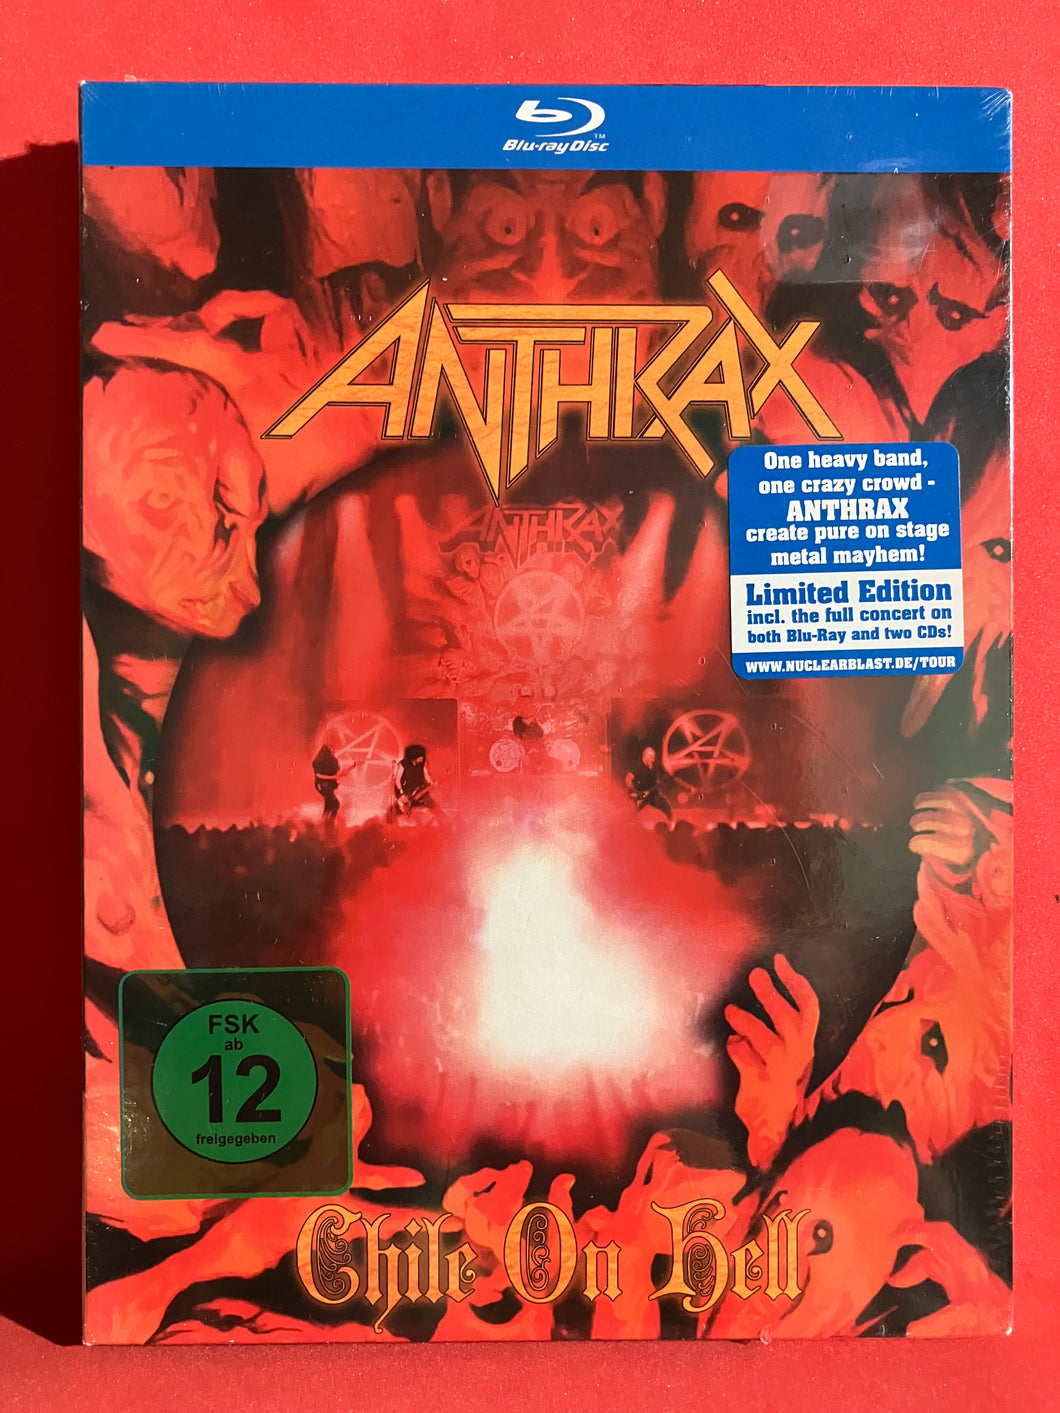 ANTHRAX - CHILE ON HELL - BLU-RAY (SEALED)